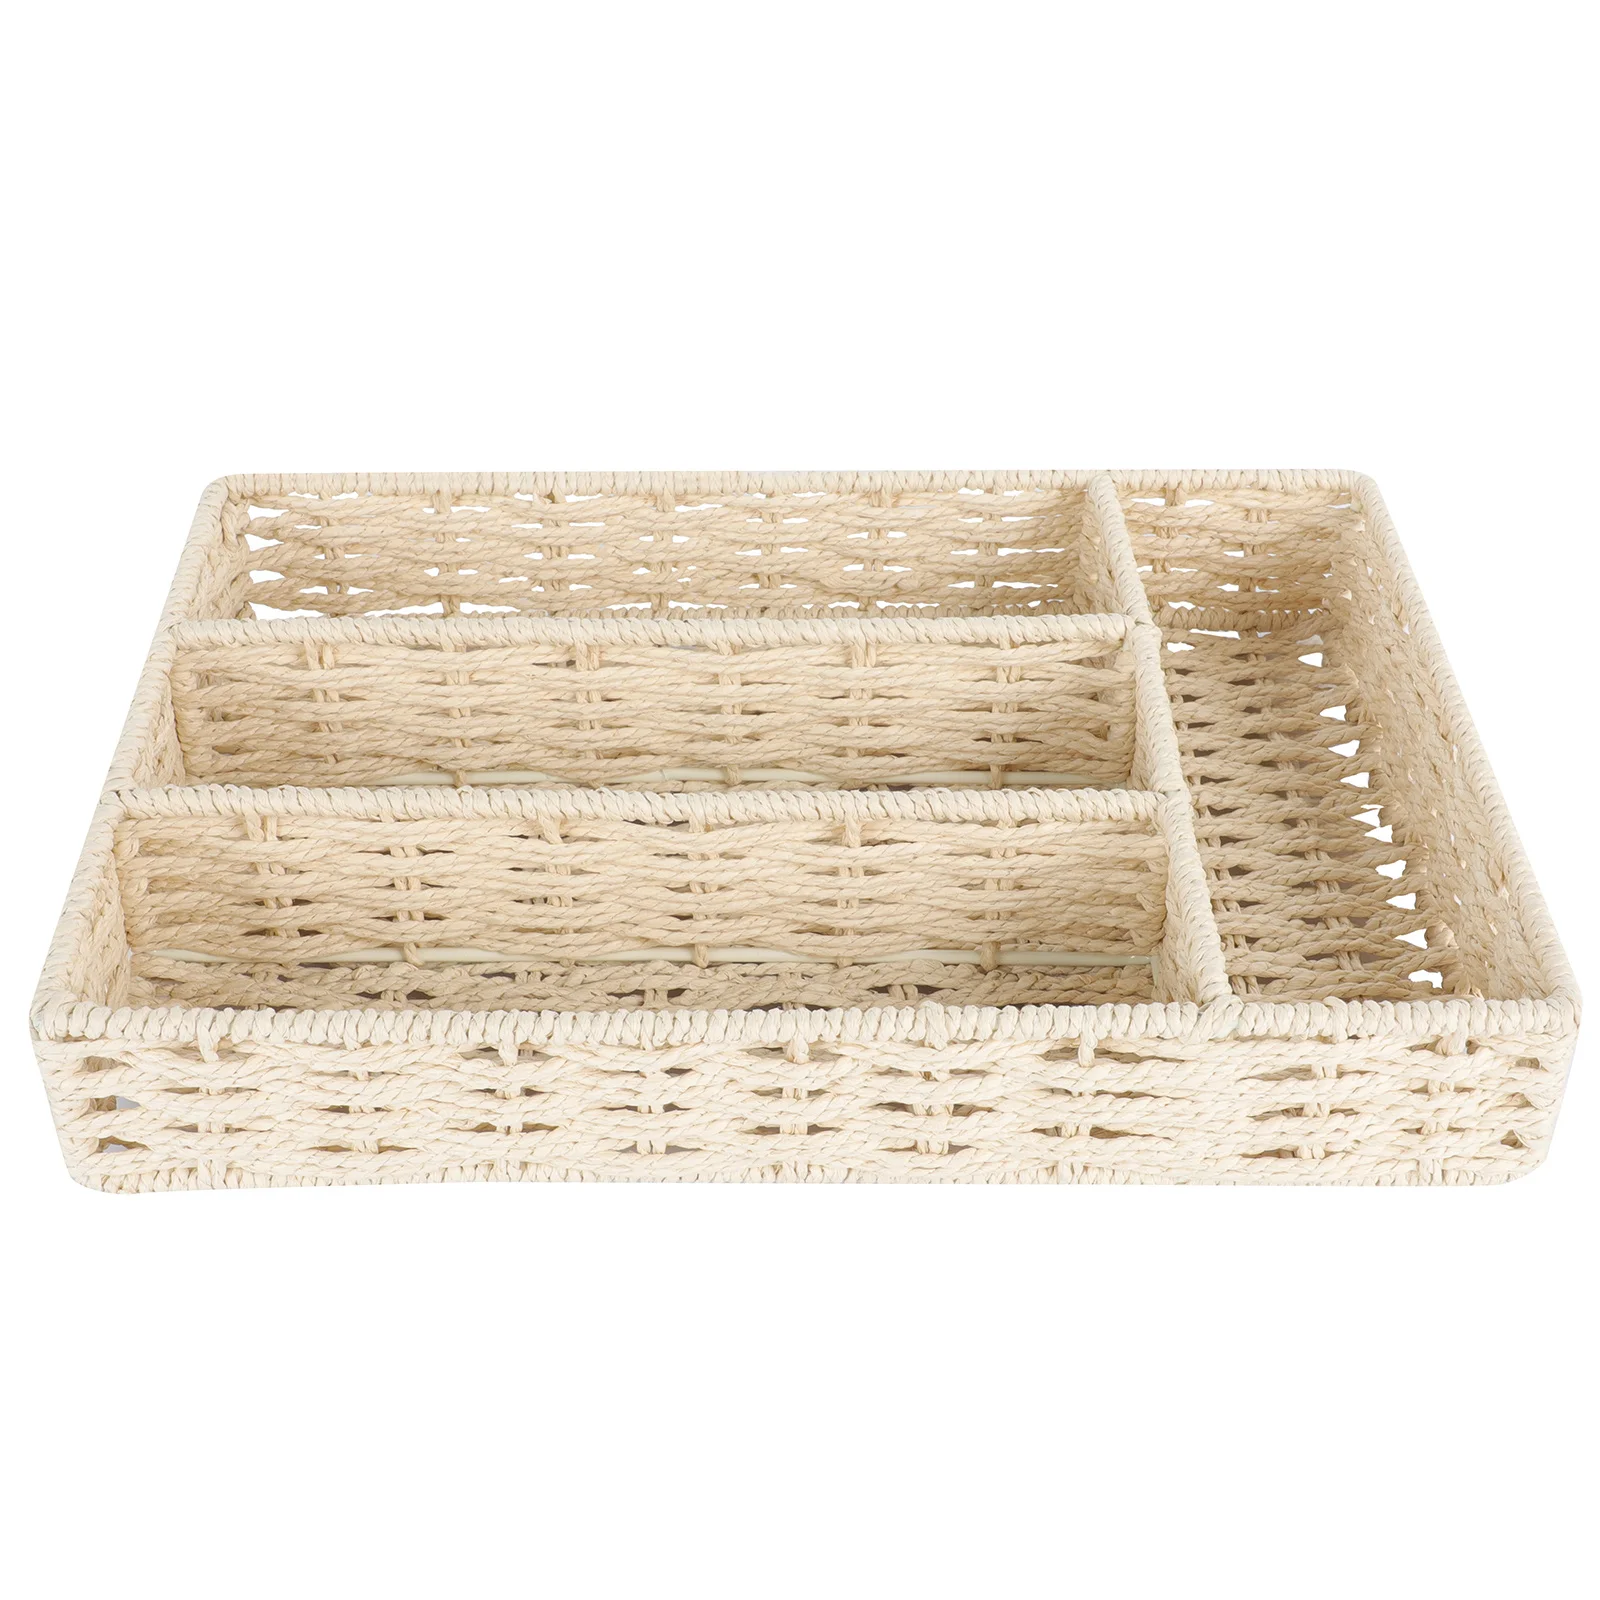 

Basket Organizer Storage Box Woven Desk Baskets Wicker Tabletea Sundries Tray Mail Straw Drawer Small Seagrass Rattan Containers